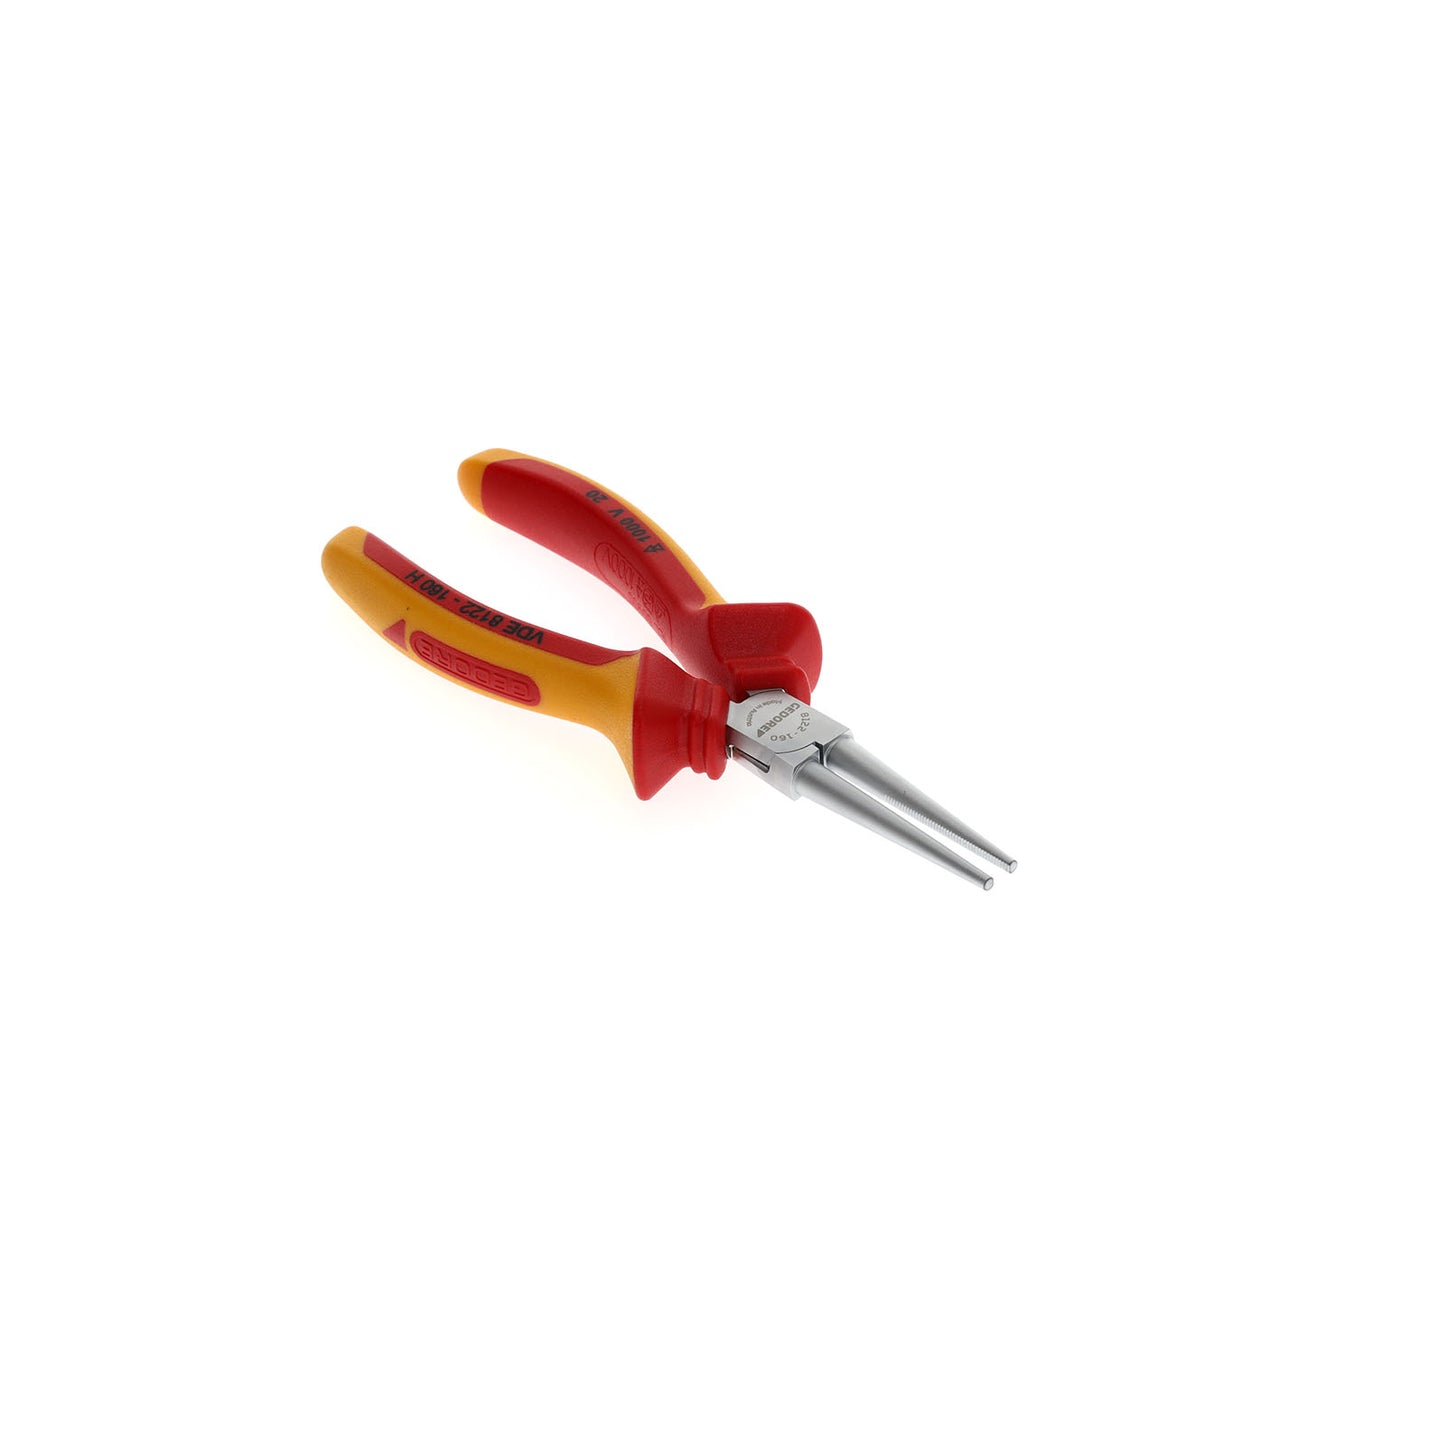 GEDORE VDE 8122-160 H - VDE round mouth pliers 160 H (1552104)